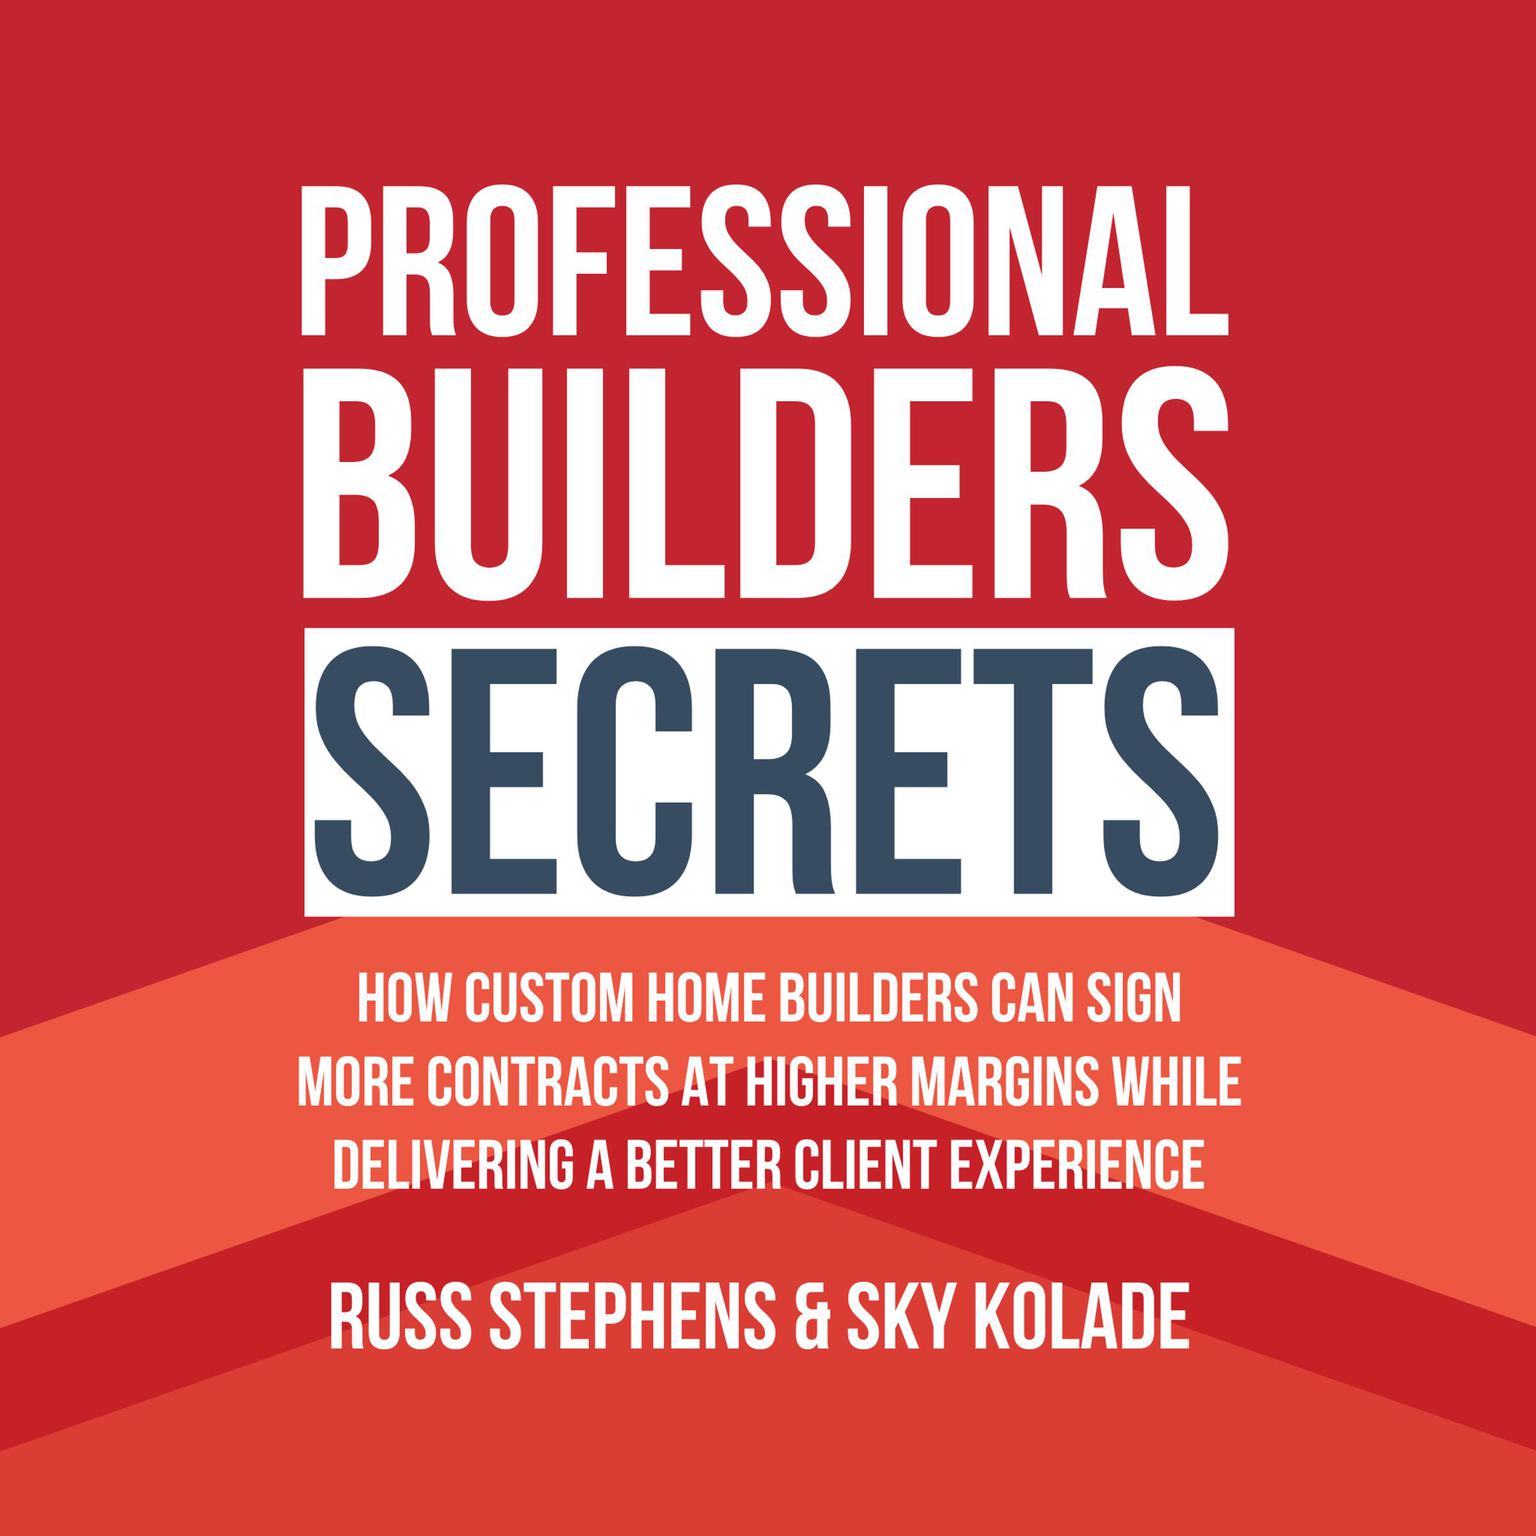 Professional Builders Secrets: How Custom Home Builders Can Sign More Contracts At Higher Margins While Delivering A Better Client Experience Audiobook, by Russ Stephens